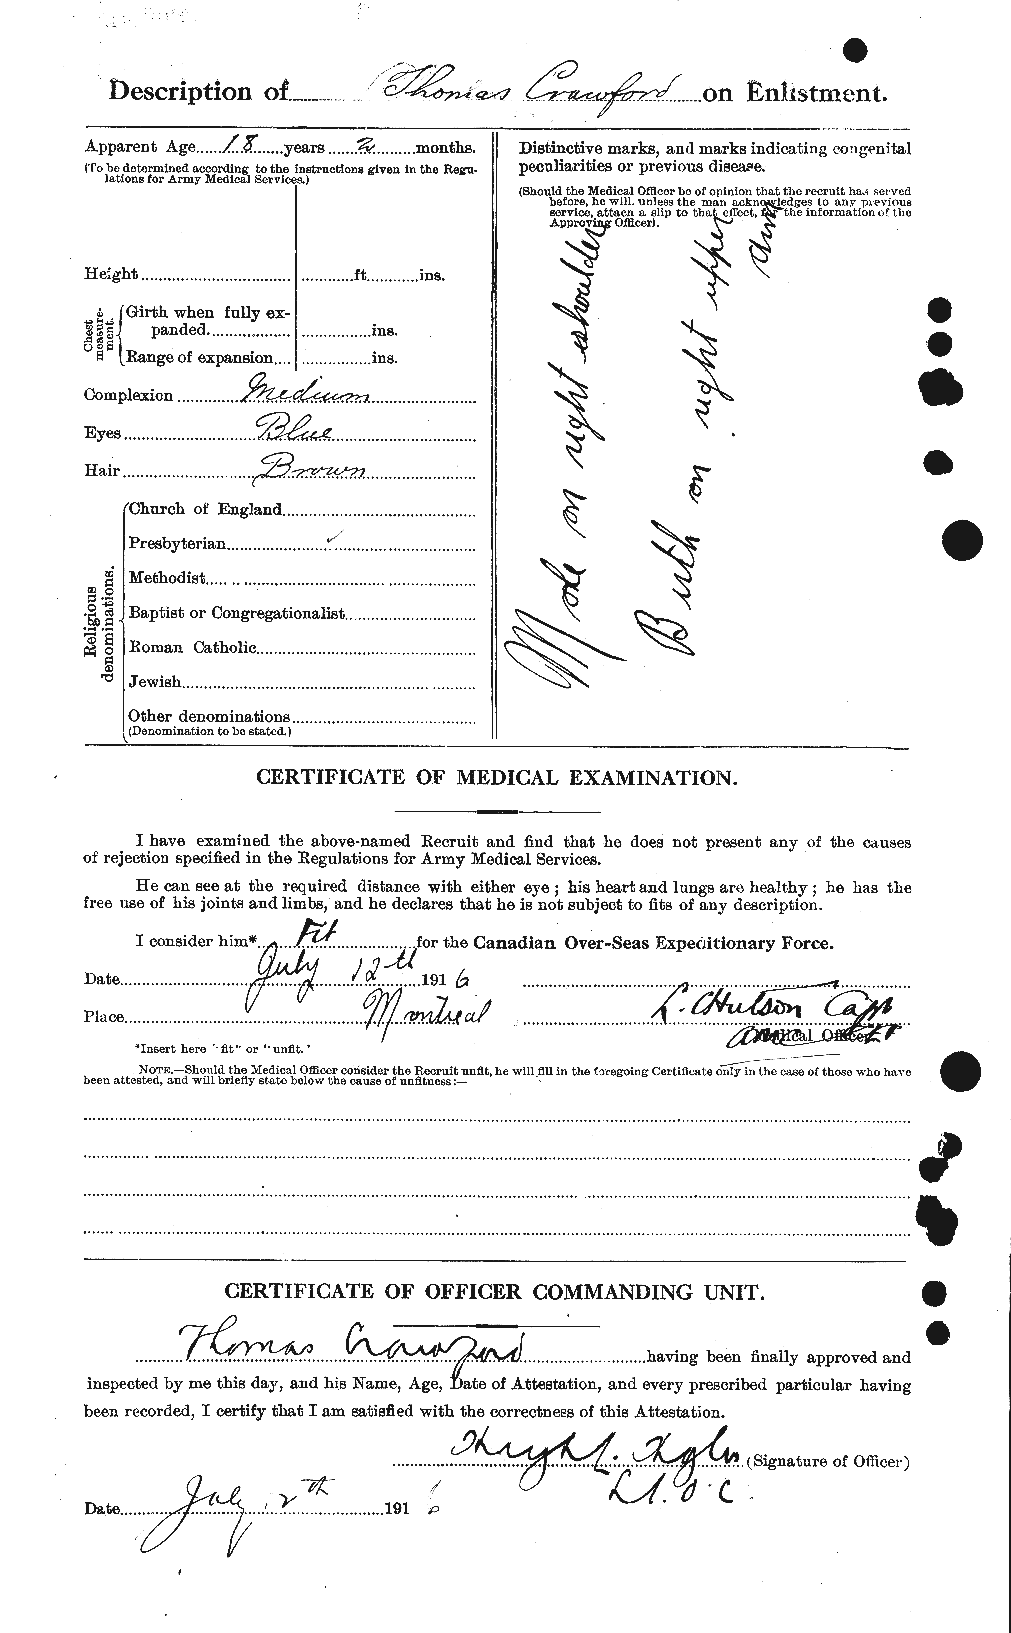 Personnel Records of the First World War - CEF 061361b